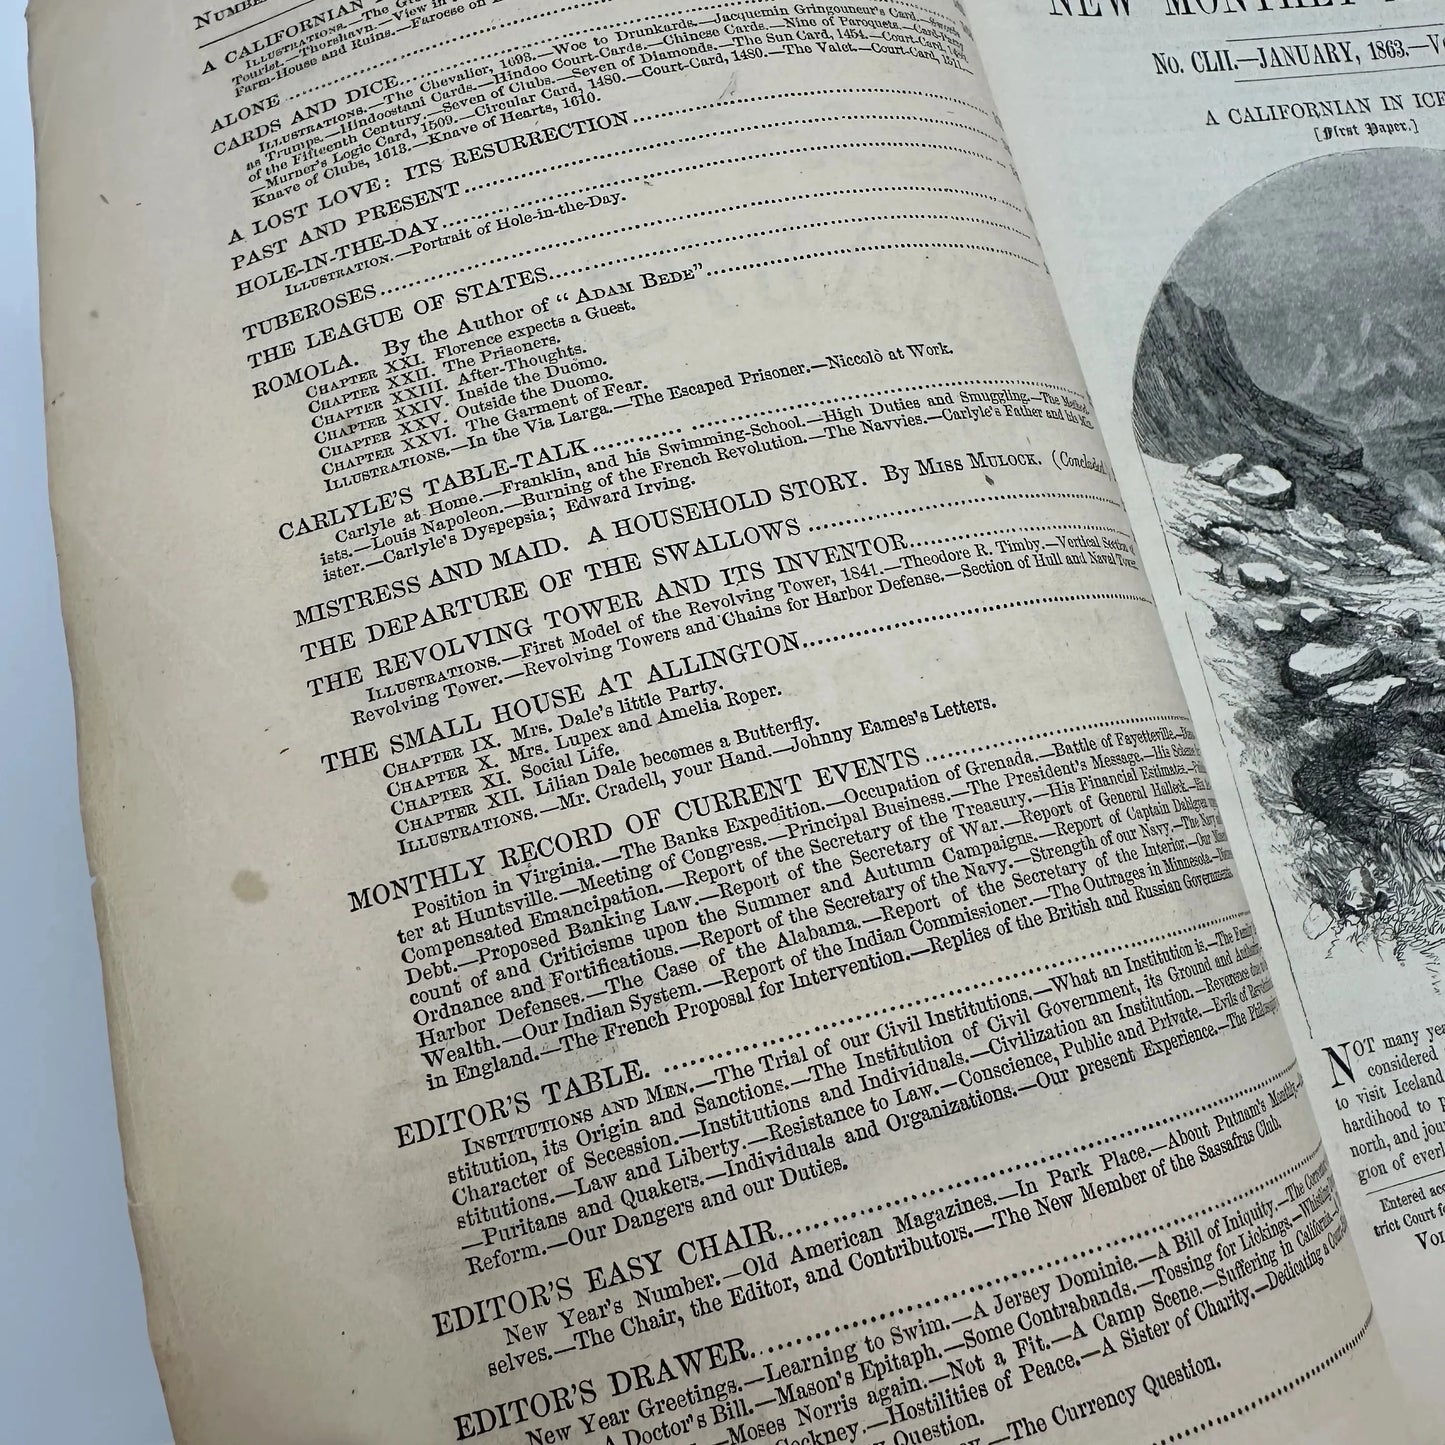 "Harper's New Monthly Magazine" — All 12 issues for the year 1863, with major Civil War news